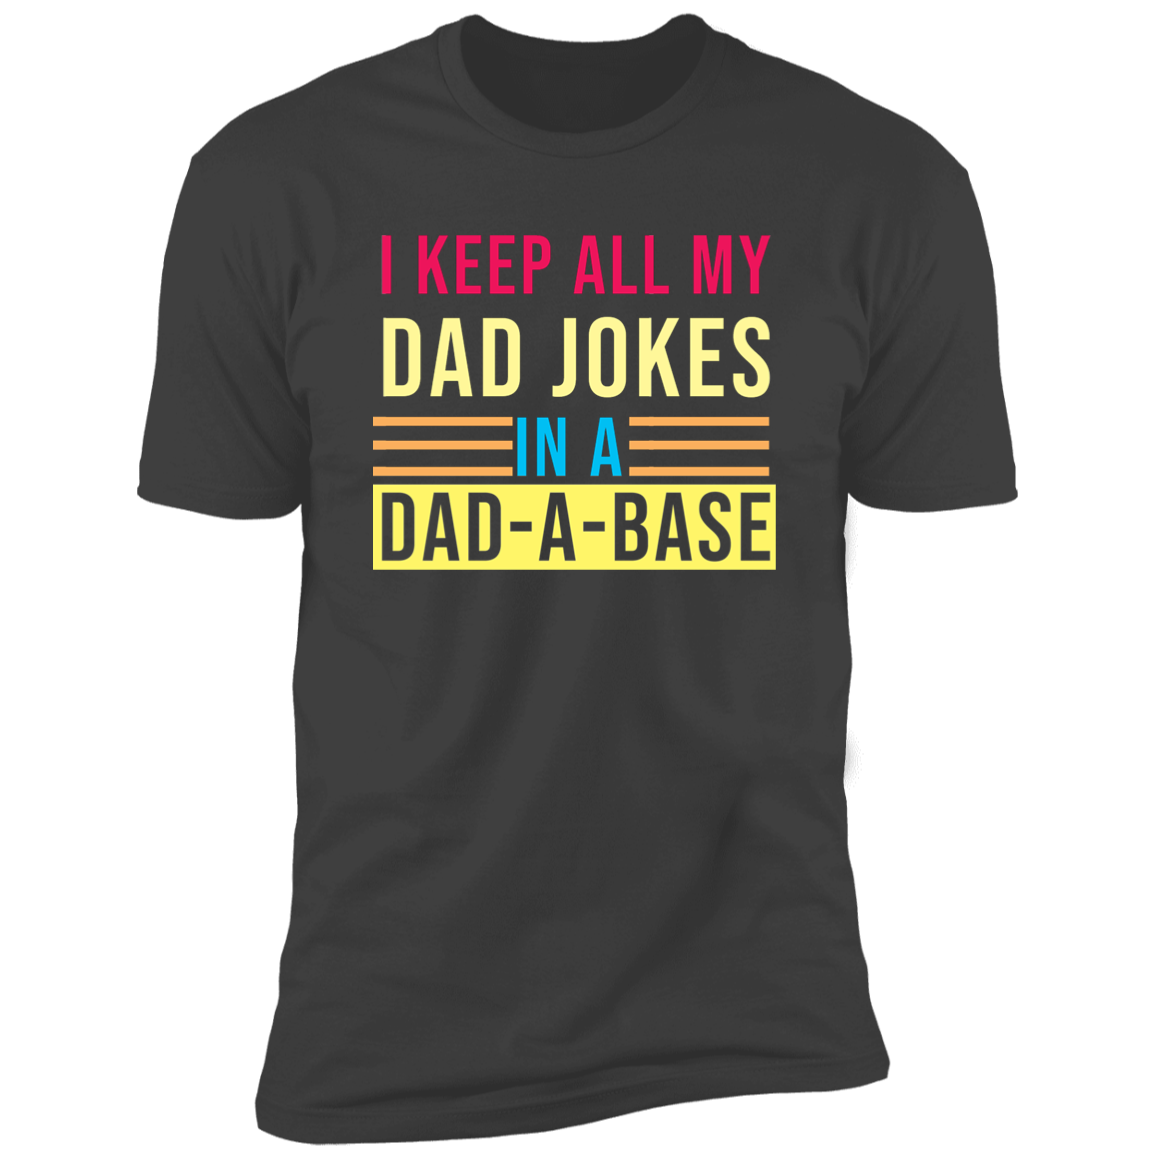 I Keep My Dad Jokes in A Dad-A-Base T-Shirt